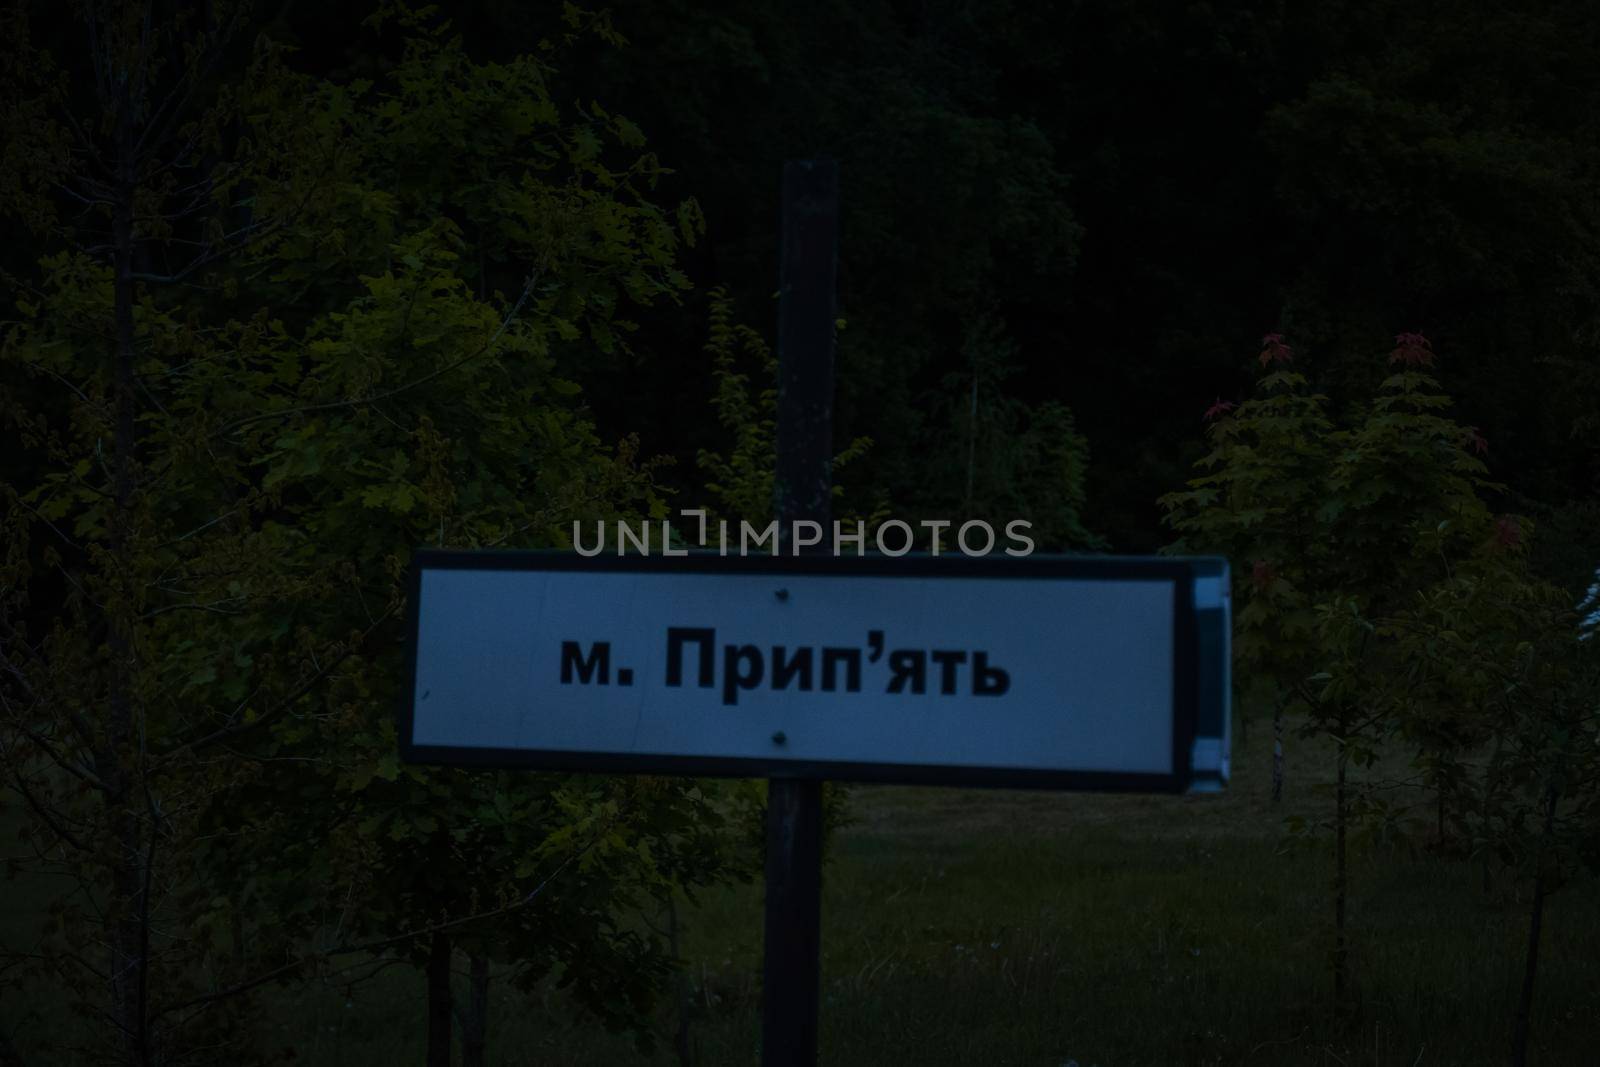 Monument in memory of the lost villages. Villages abandoned after the Chernobyl accident. Plaques with the names of settlements by mosfet_ua